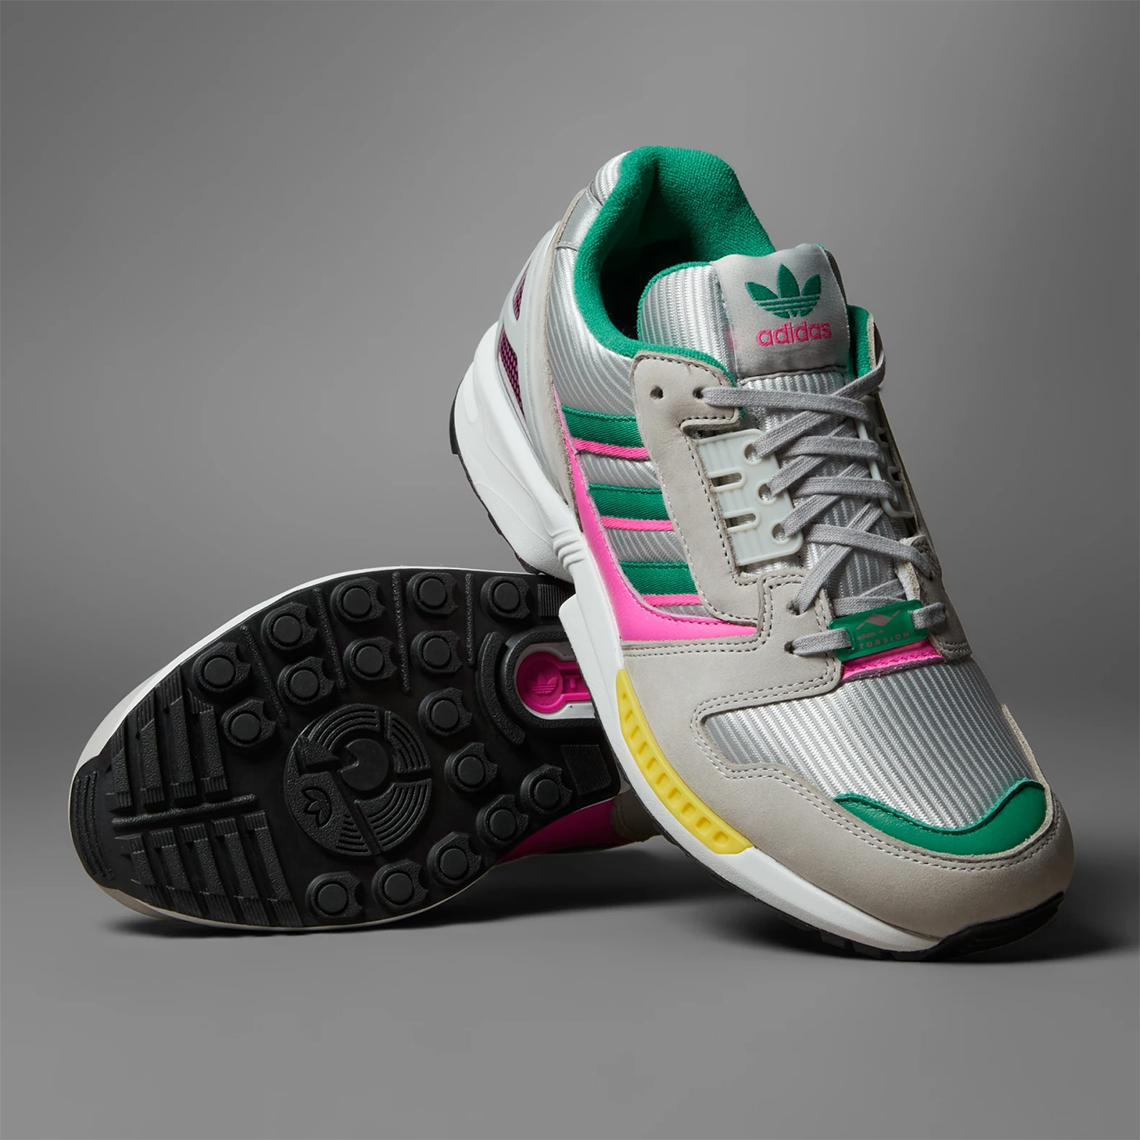 adidas zx8000 grey two court green screaming pink IG3076 8